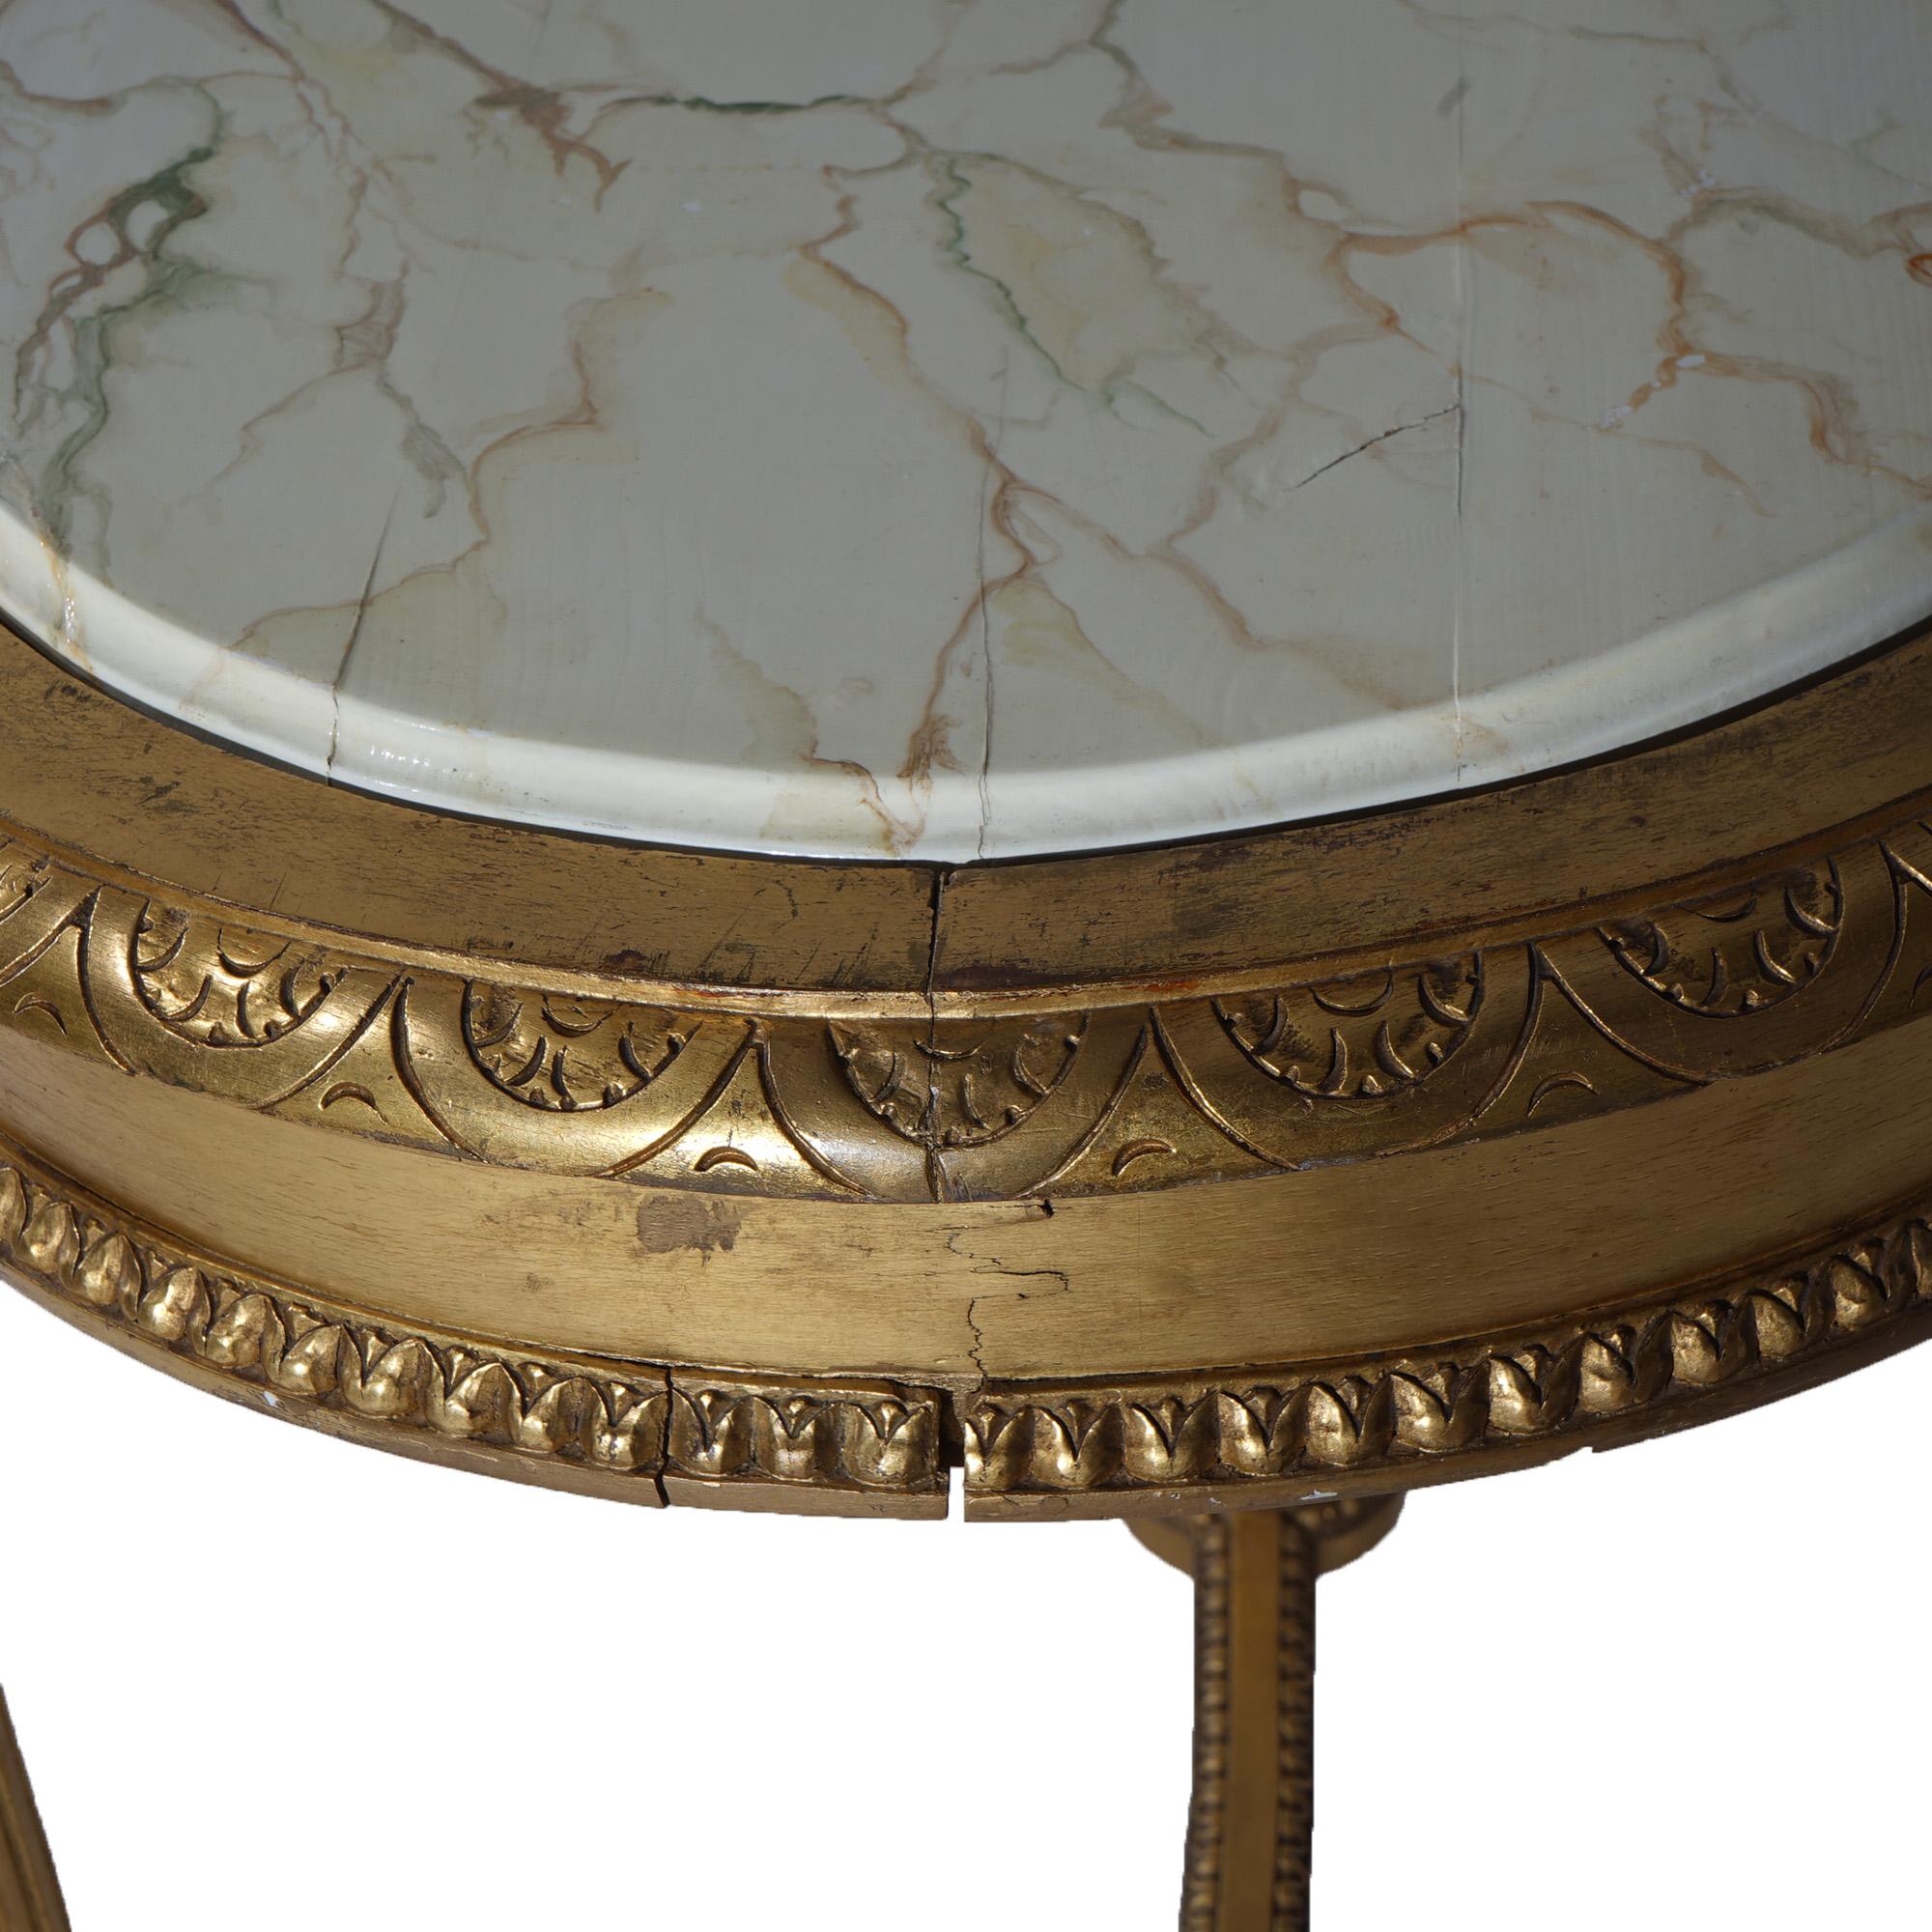 Antique French Louis XVI Style Giltwood Parlor Table with Faux Painted Top 19thC 7